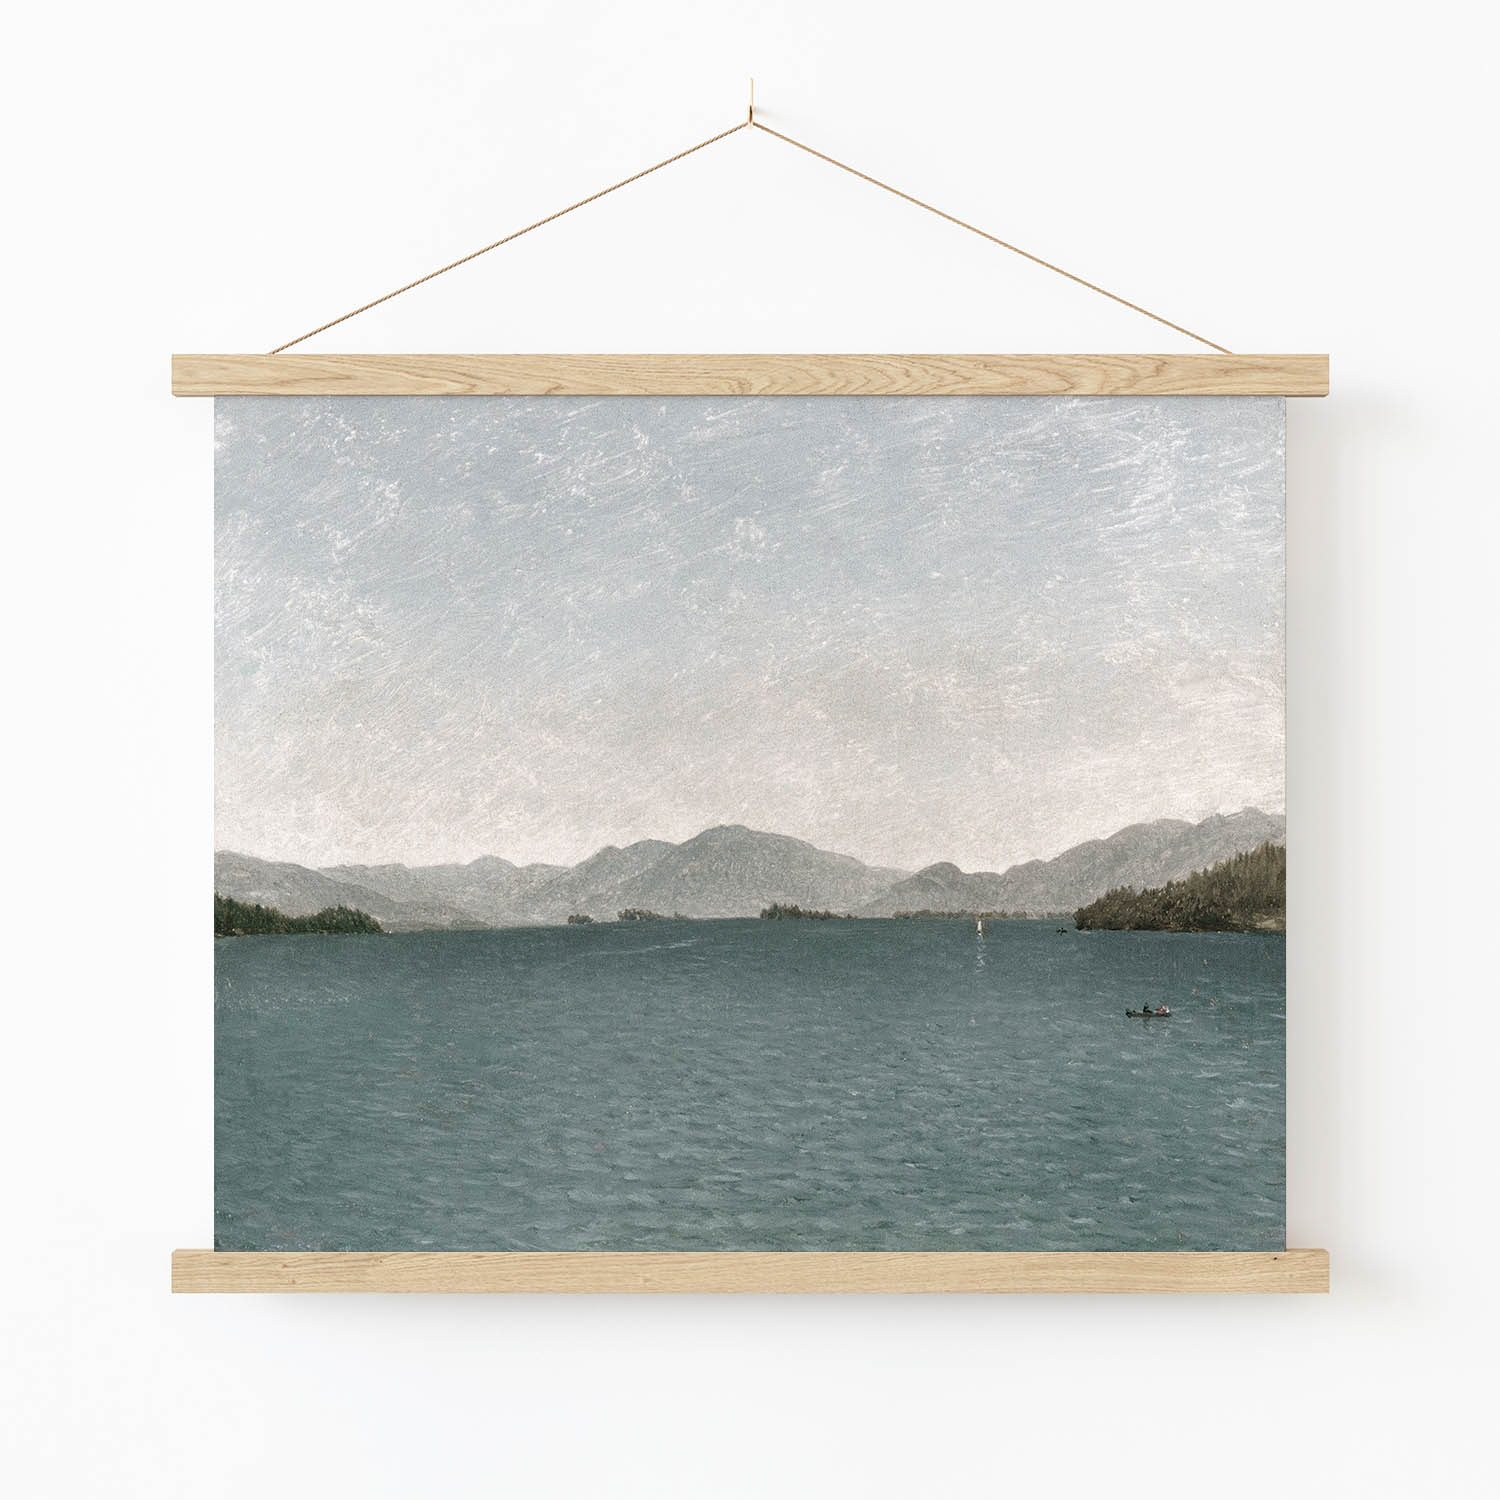 Blue and Gray Art Print in Wood Hanger Frame on Wall